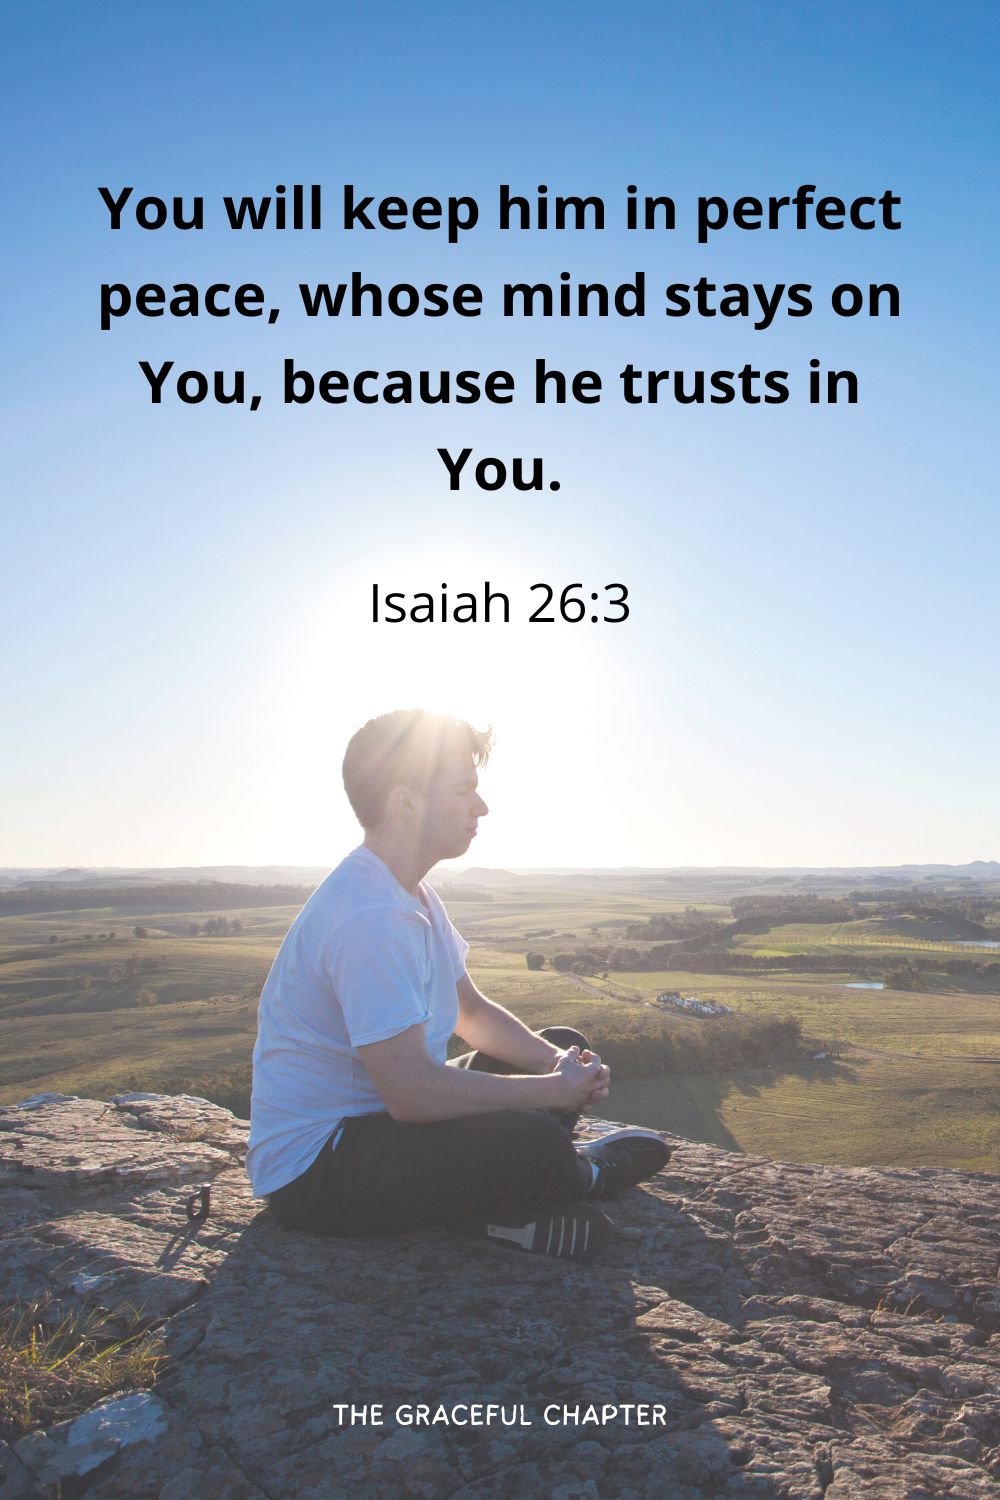 You will keep him in perfect peace, whose mind stays on You, because he trusts in You.